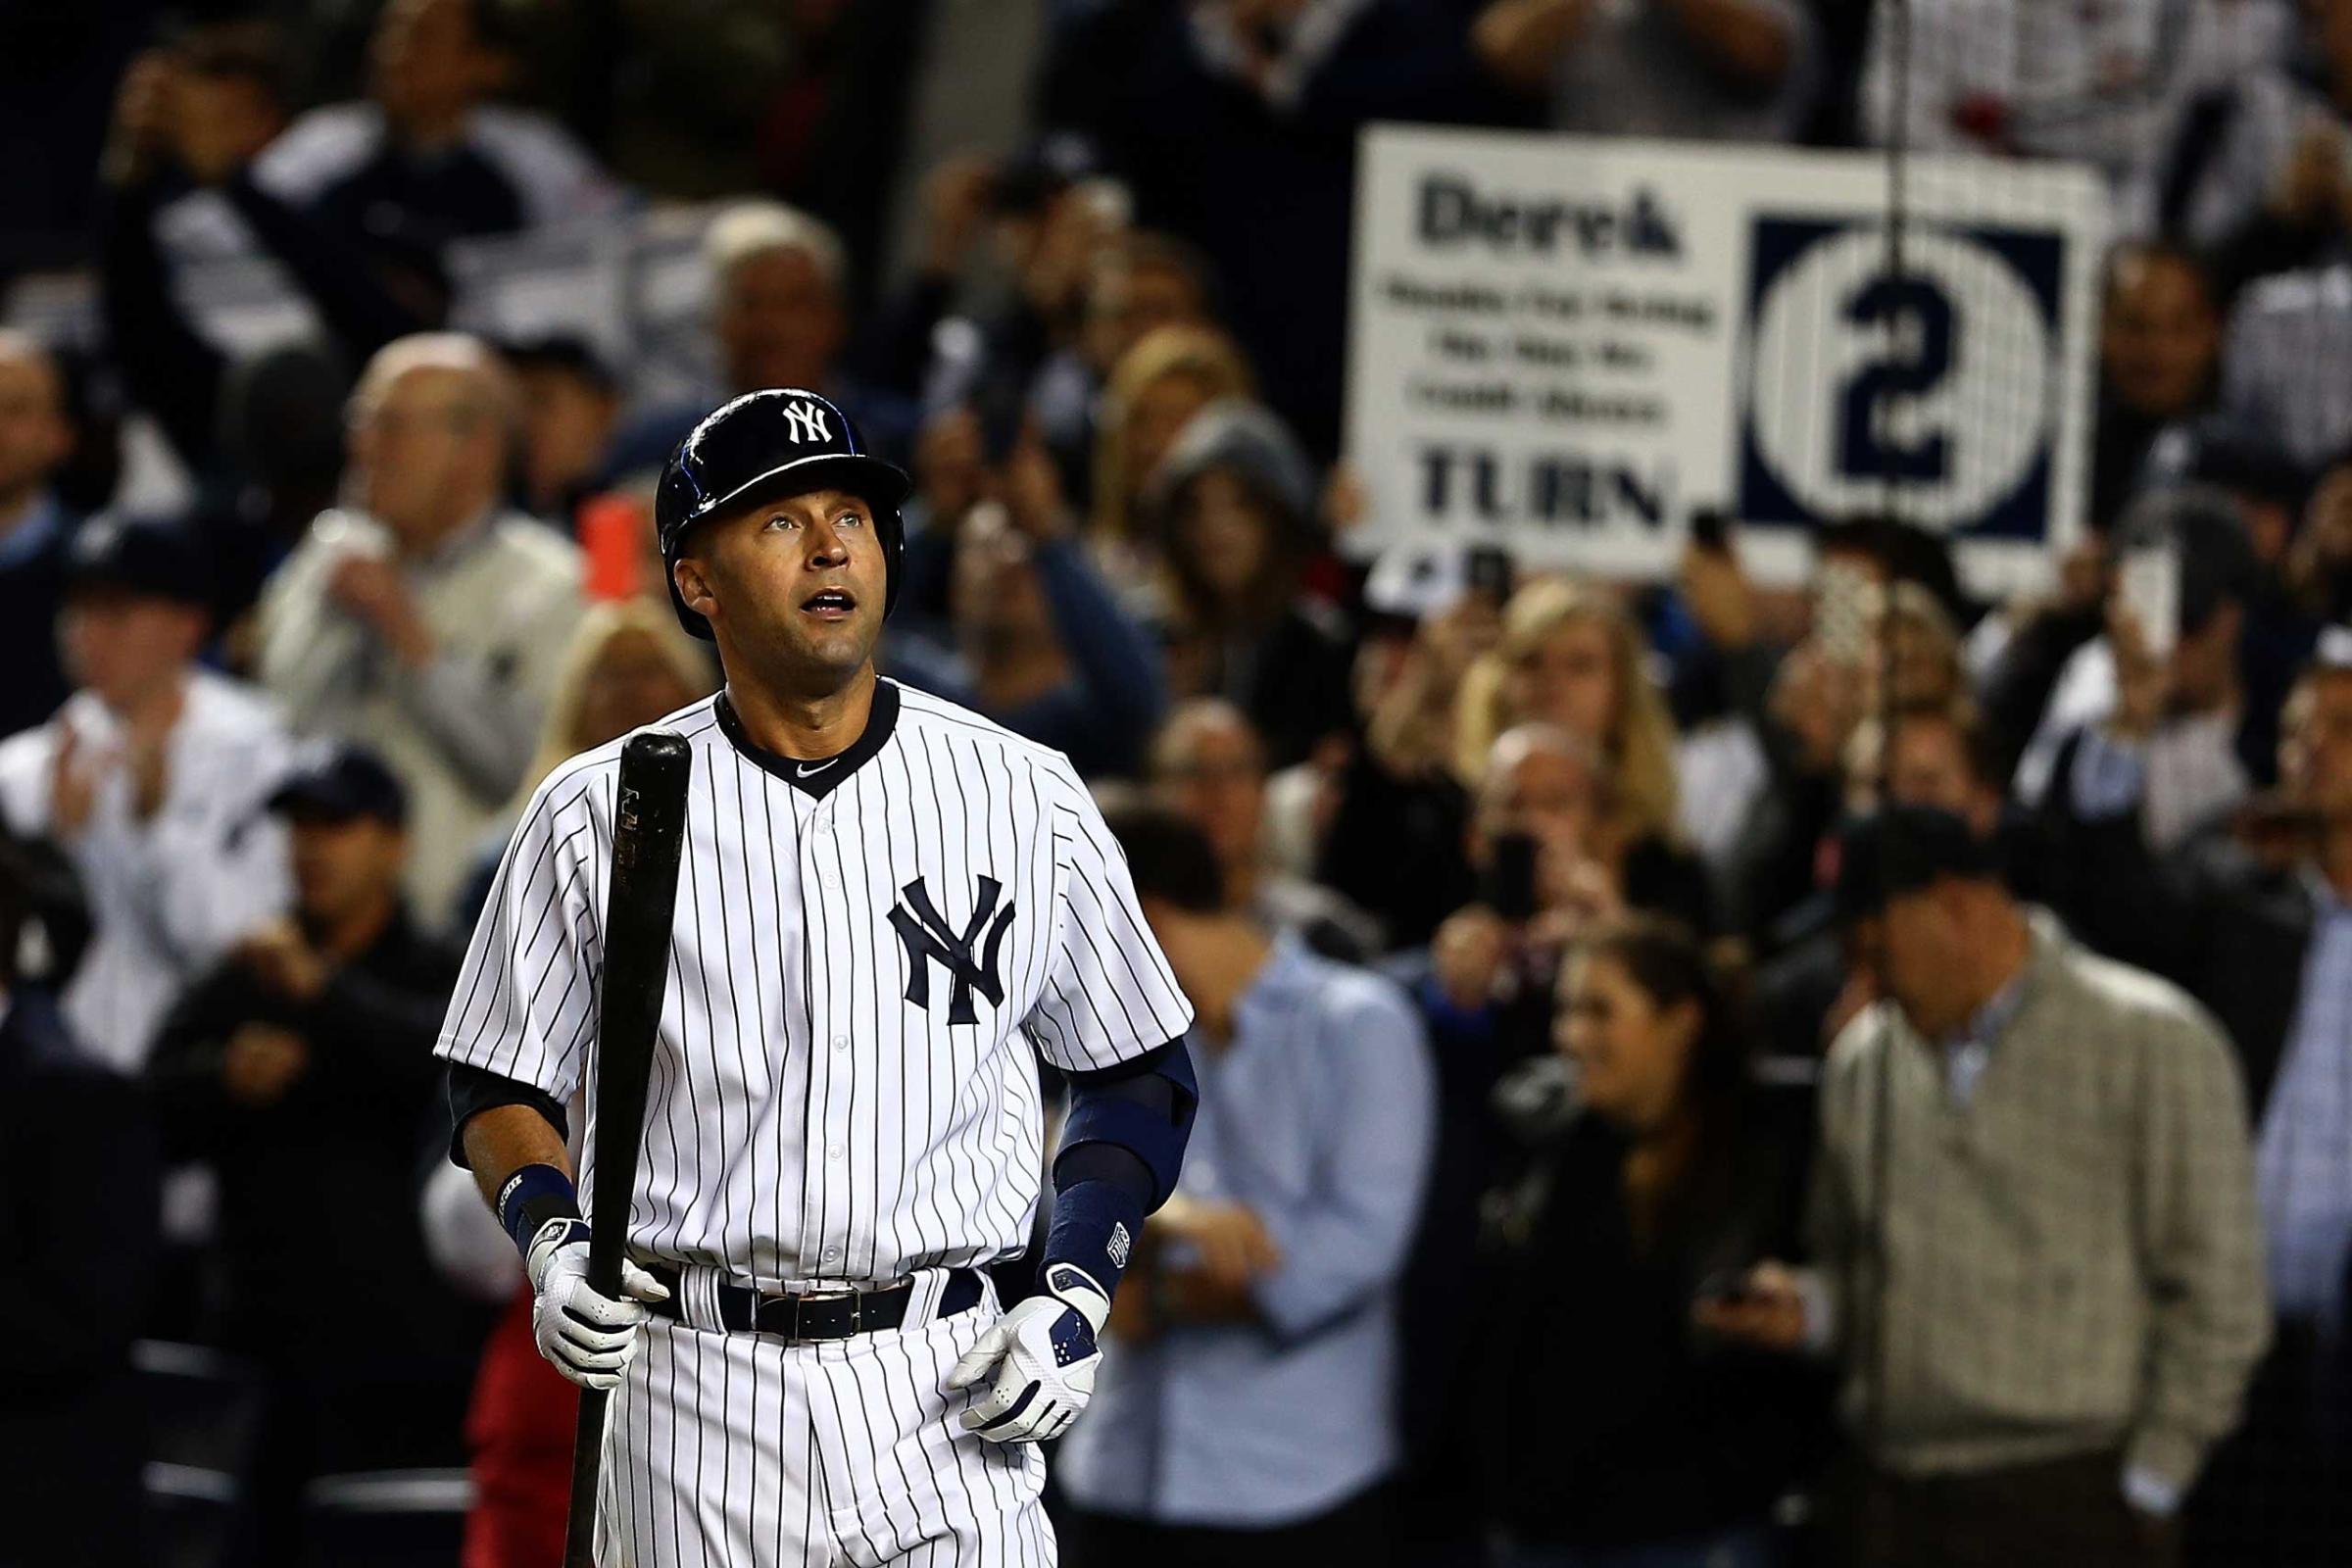 Derek Jeter walks to the plate against the Baltimore Orioles during his last game ever at Yankee Stadium on Sept. 25, 2014.